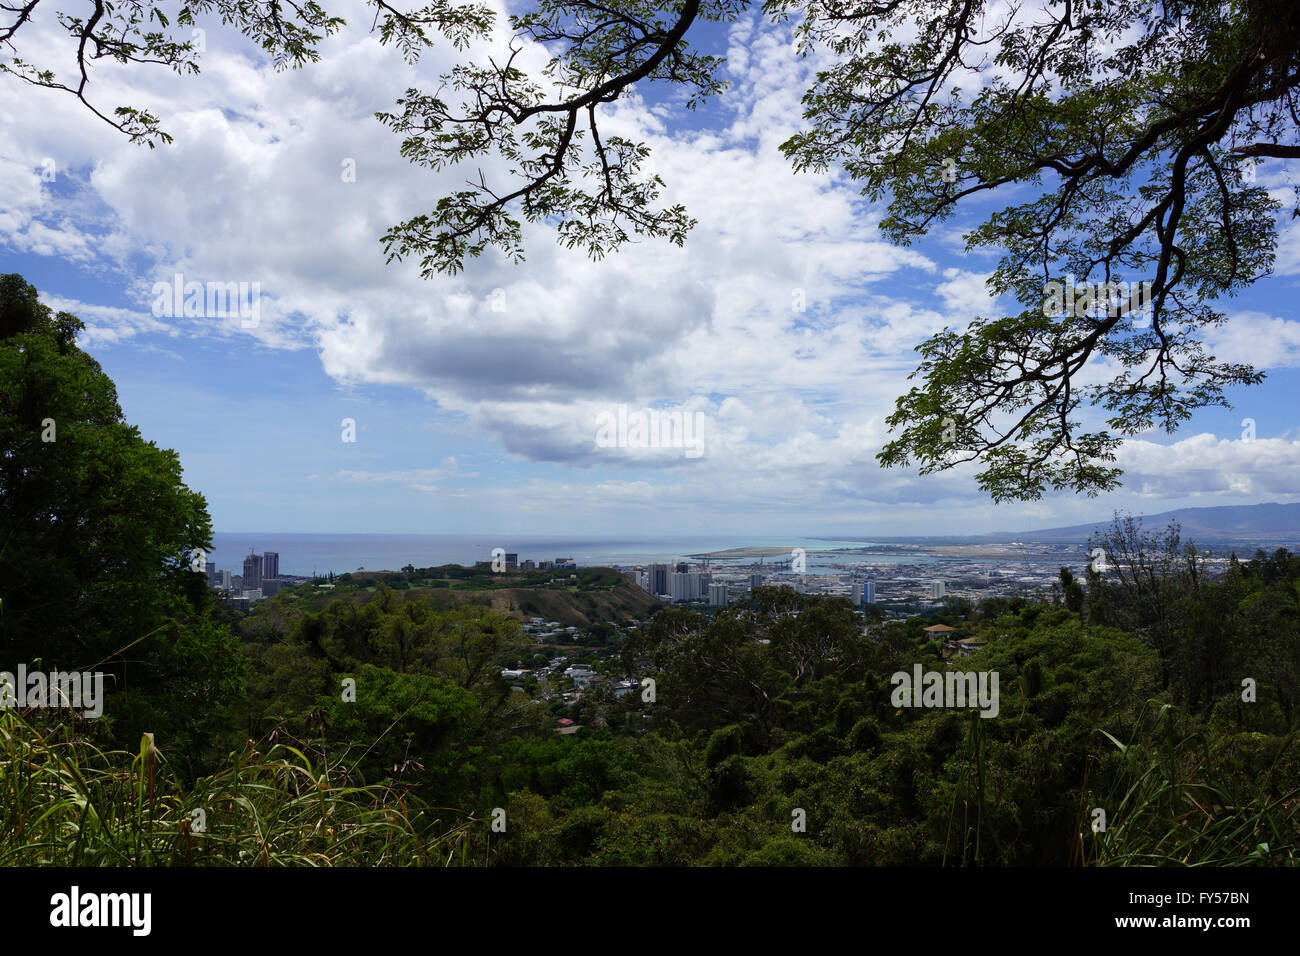 Punchbowl Crater, Nuuanu, Airport, Kalihi, Harbor and Honolulu Cityscape looking to the ocean from high up in the hills with hou Stock Photo